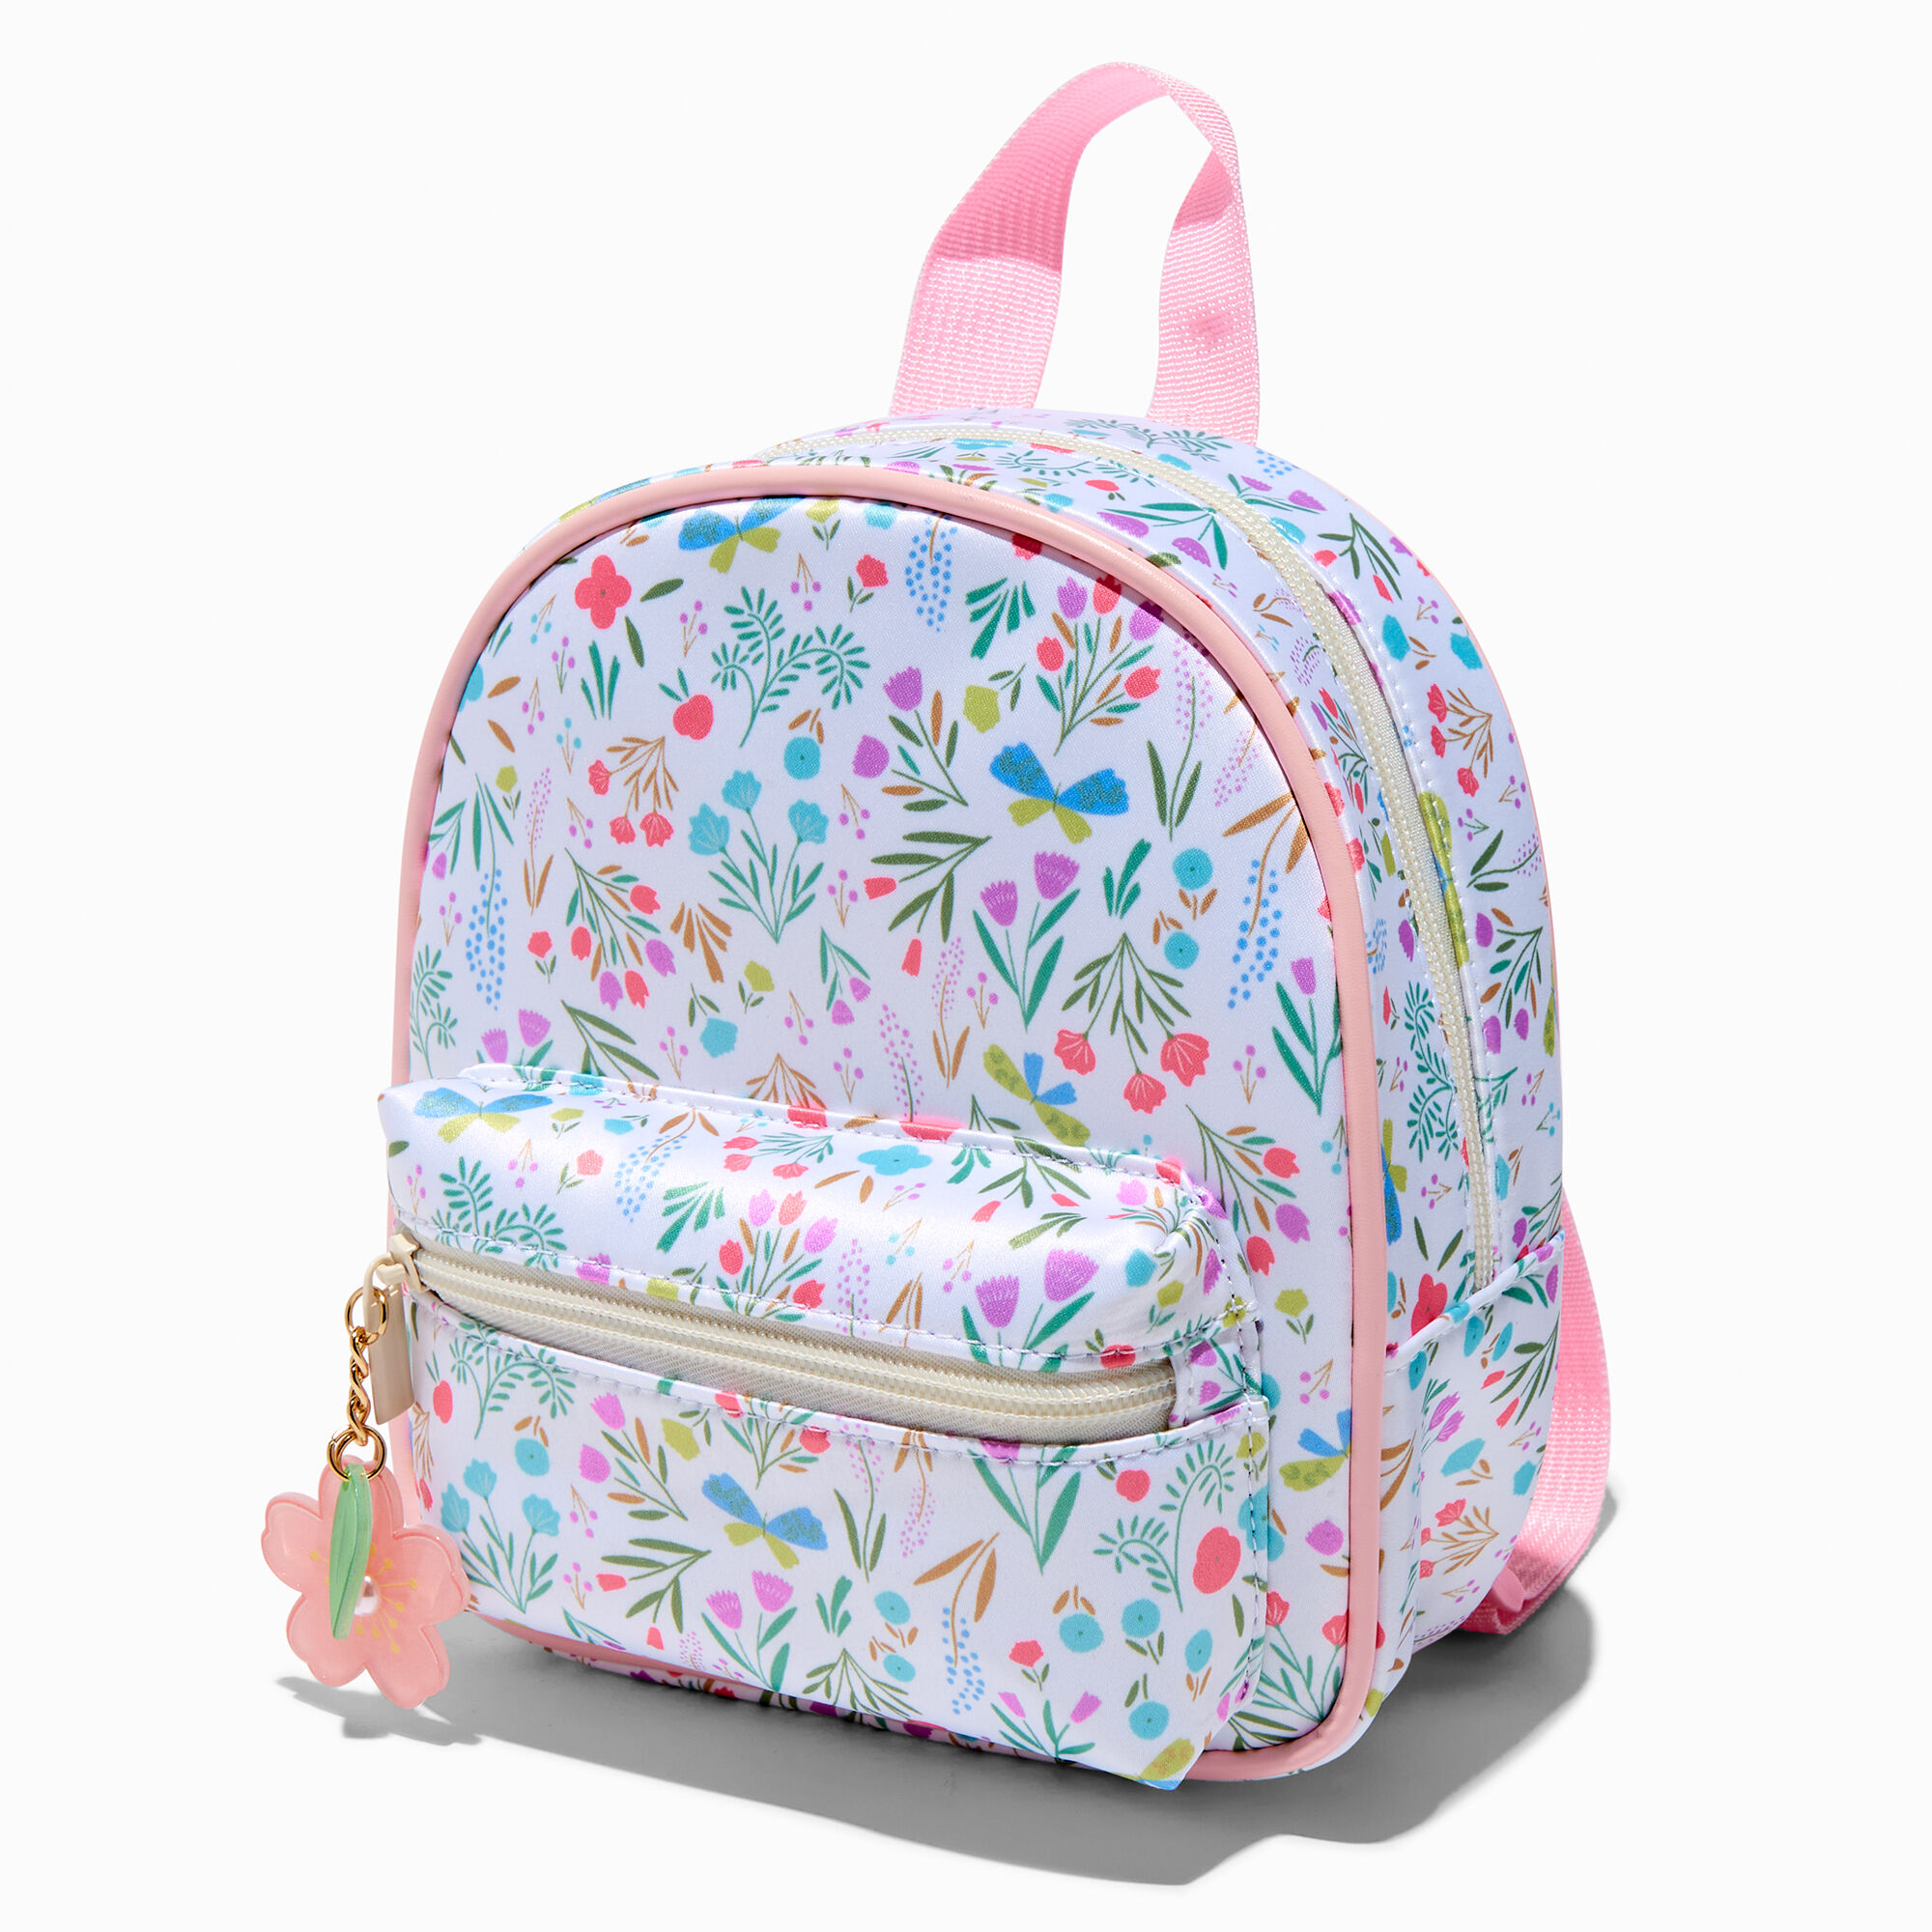 View Claires Club Spring Flower Mini Backpack information